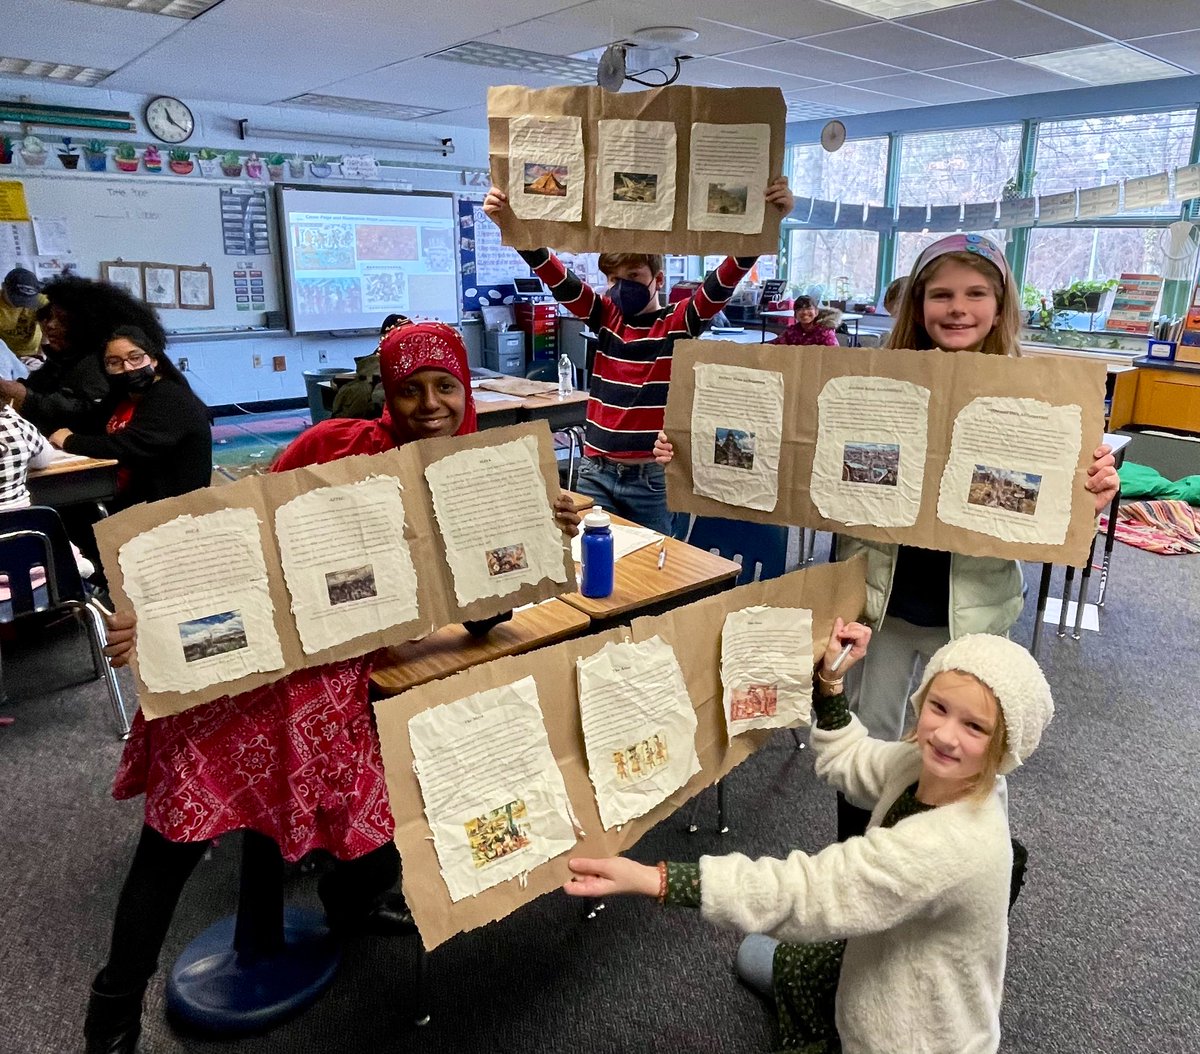 Our CKLA unit finished with a publishing party of our Codex Projects! These research projects on Mesoamerican civilizations were made to resemble some of the ancient documents we learned about. Students worked hard to create amazing final products! <a target='_blank' href='http://twitter.com/CampbellAPS'>@CampbellAPS</a> <a target='_blank' href='http://twitter.com/APSLiteracy'>@APSLiteracy</a> <a target='_blank' href='https://t.co/XJybuTZ9wS'>https://t.co/XJybuTZ9wS</a>